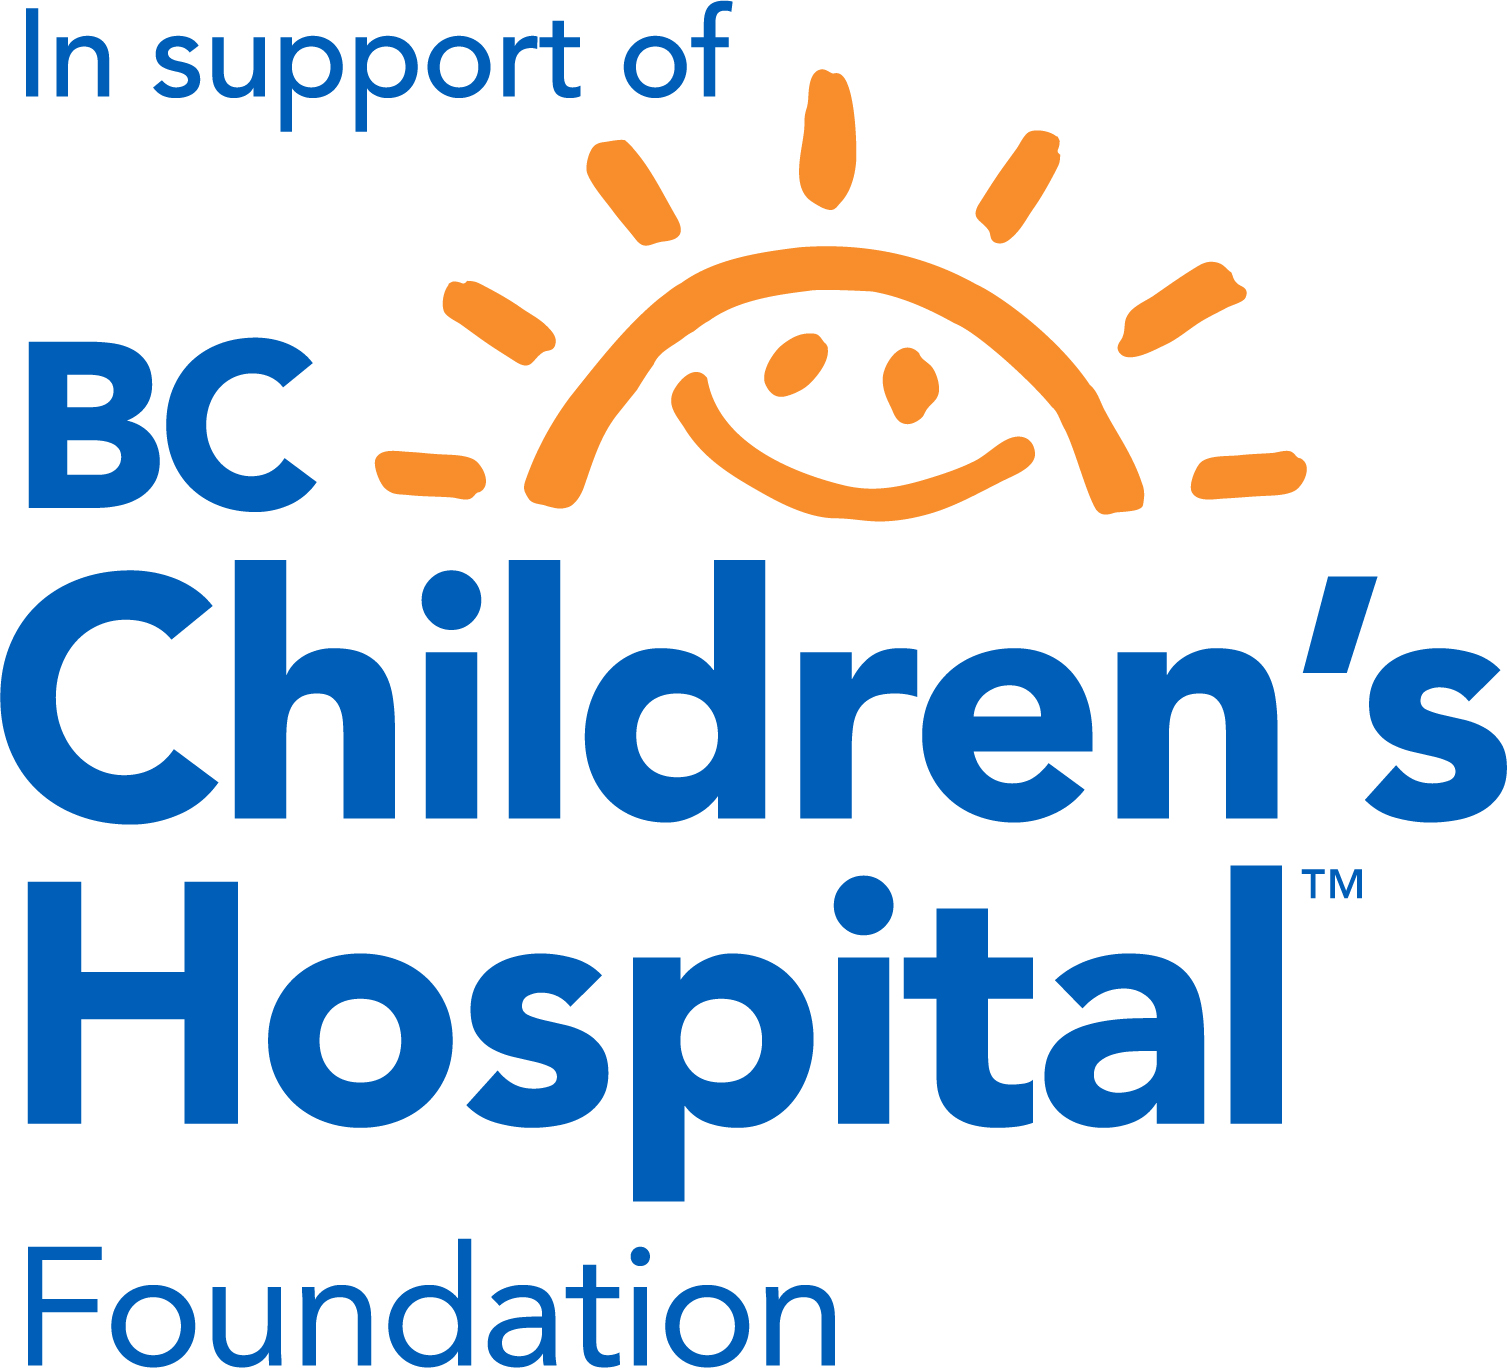 Comox Valley Nufloors in support of BC Children's Hospital Foundation